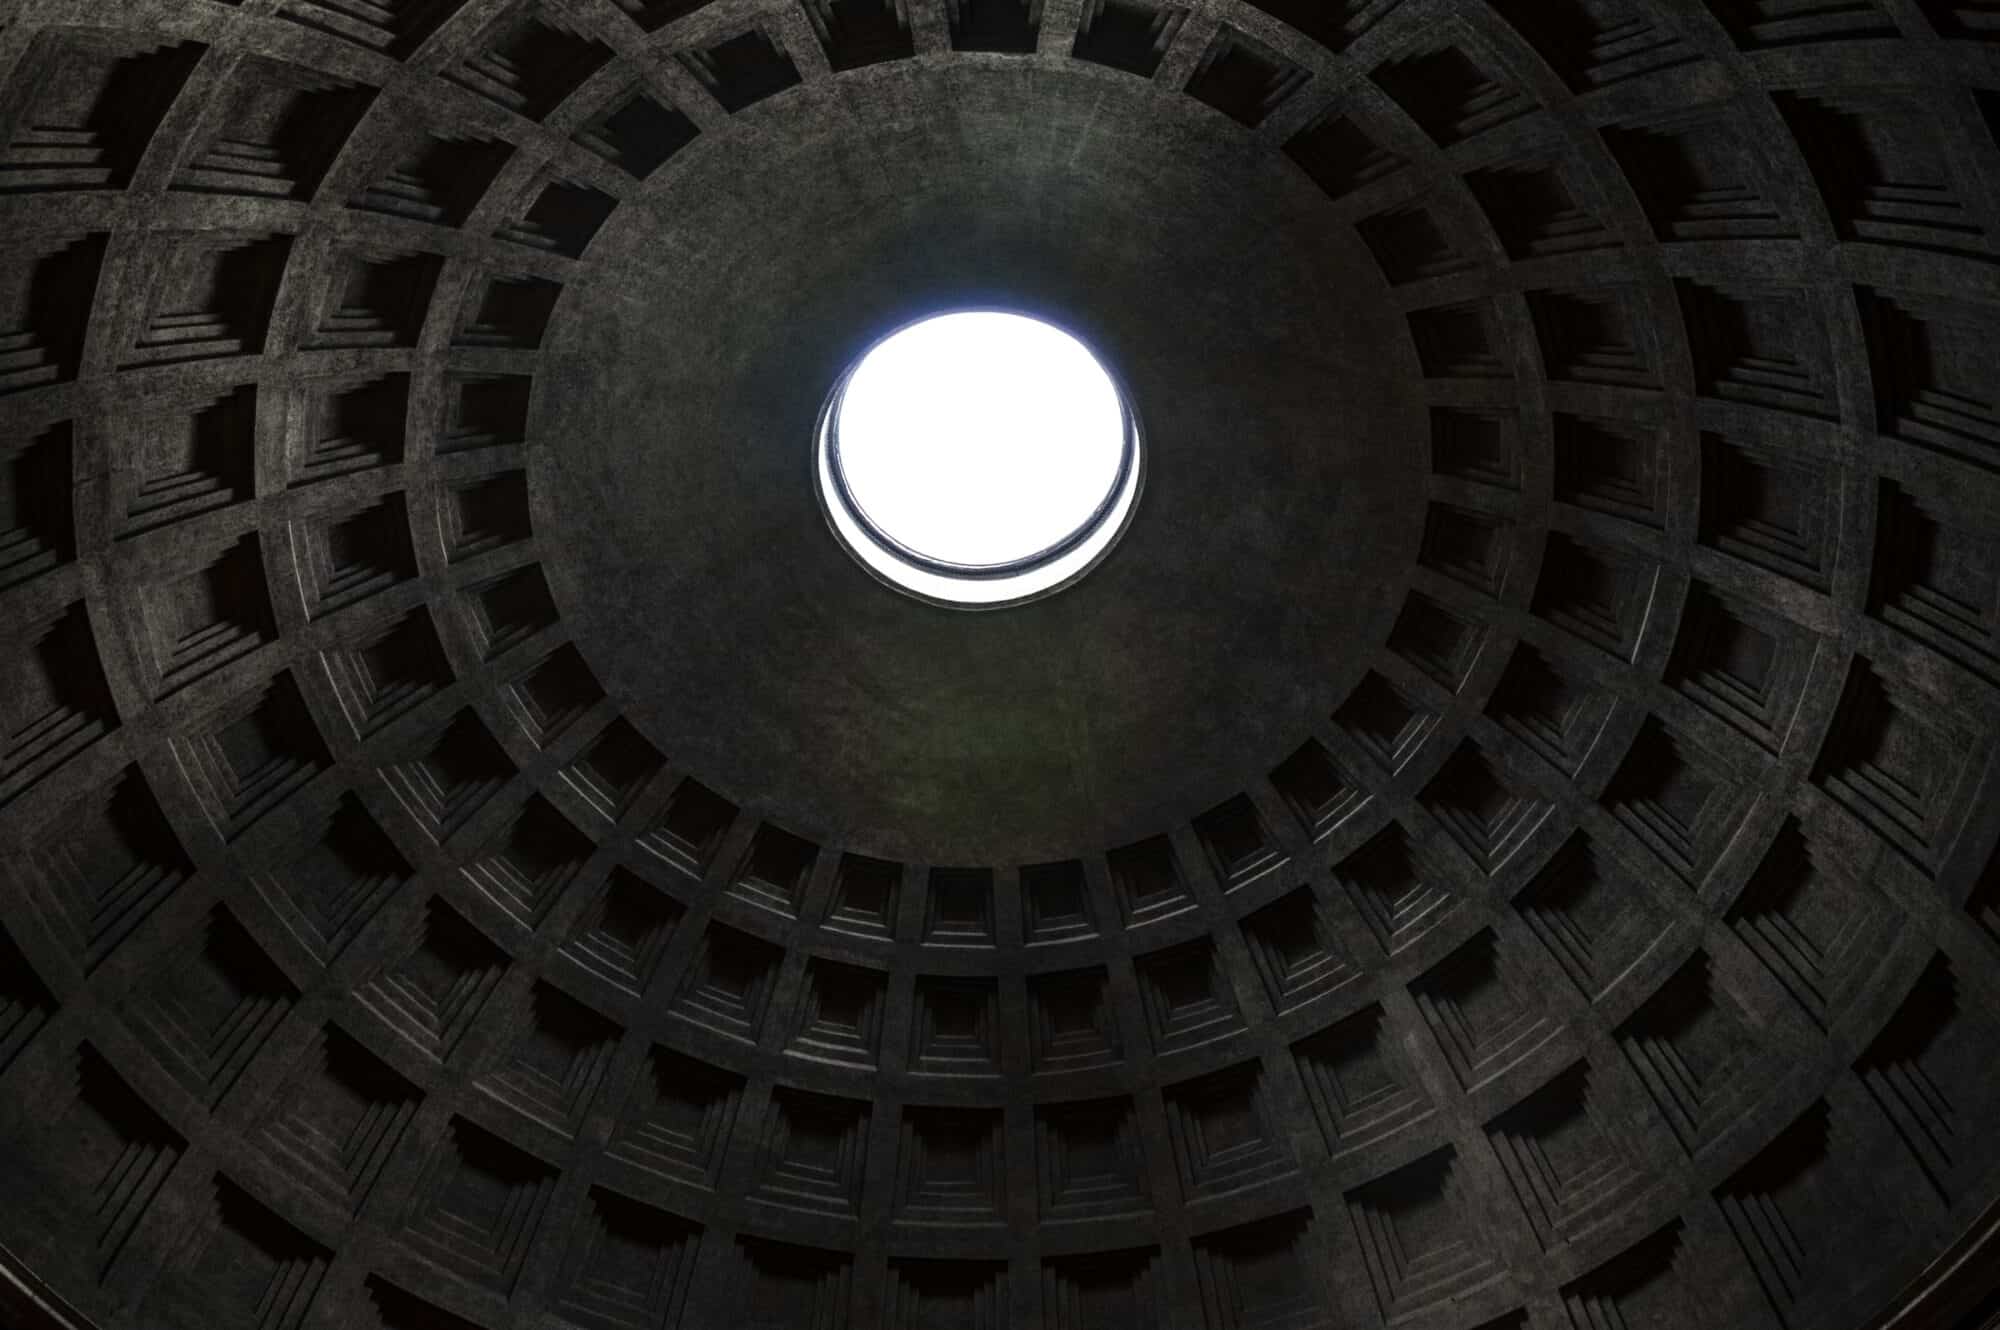 The hole in the roof of the Pantheon in Rome, Italy.